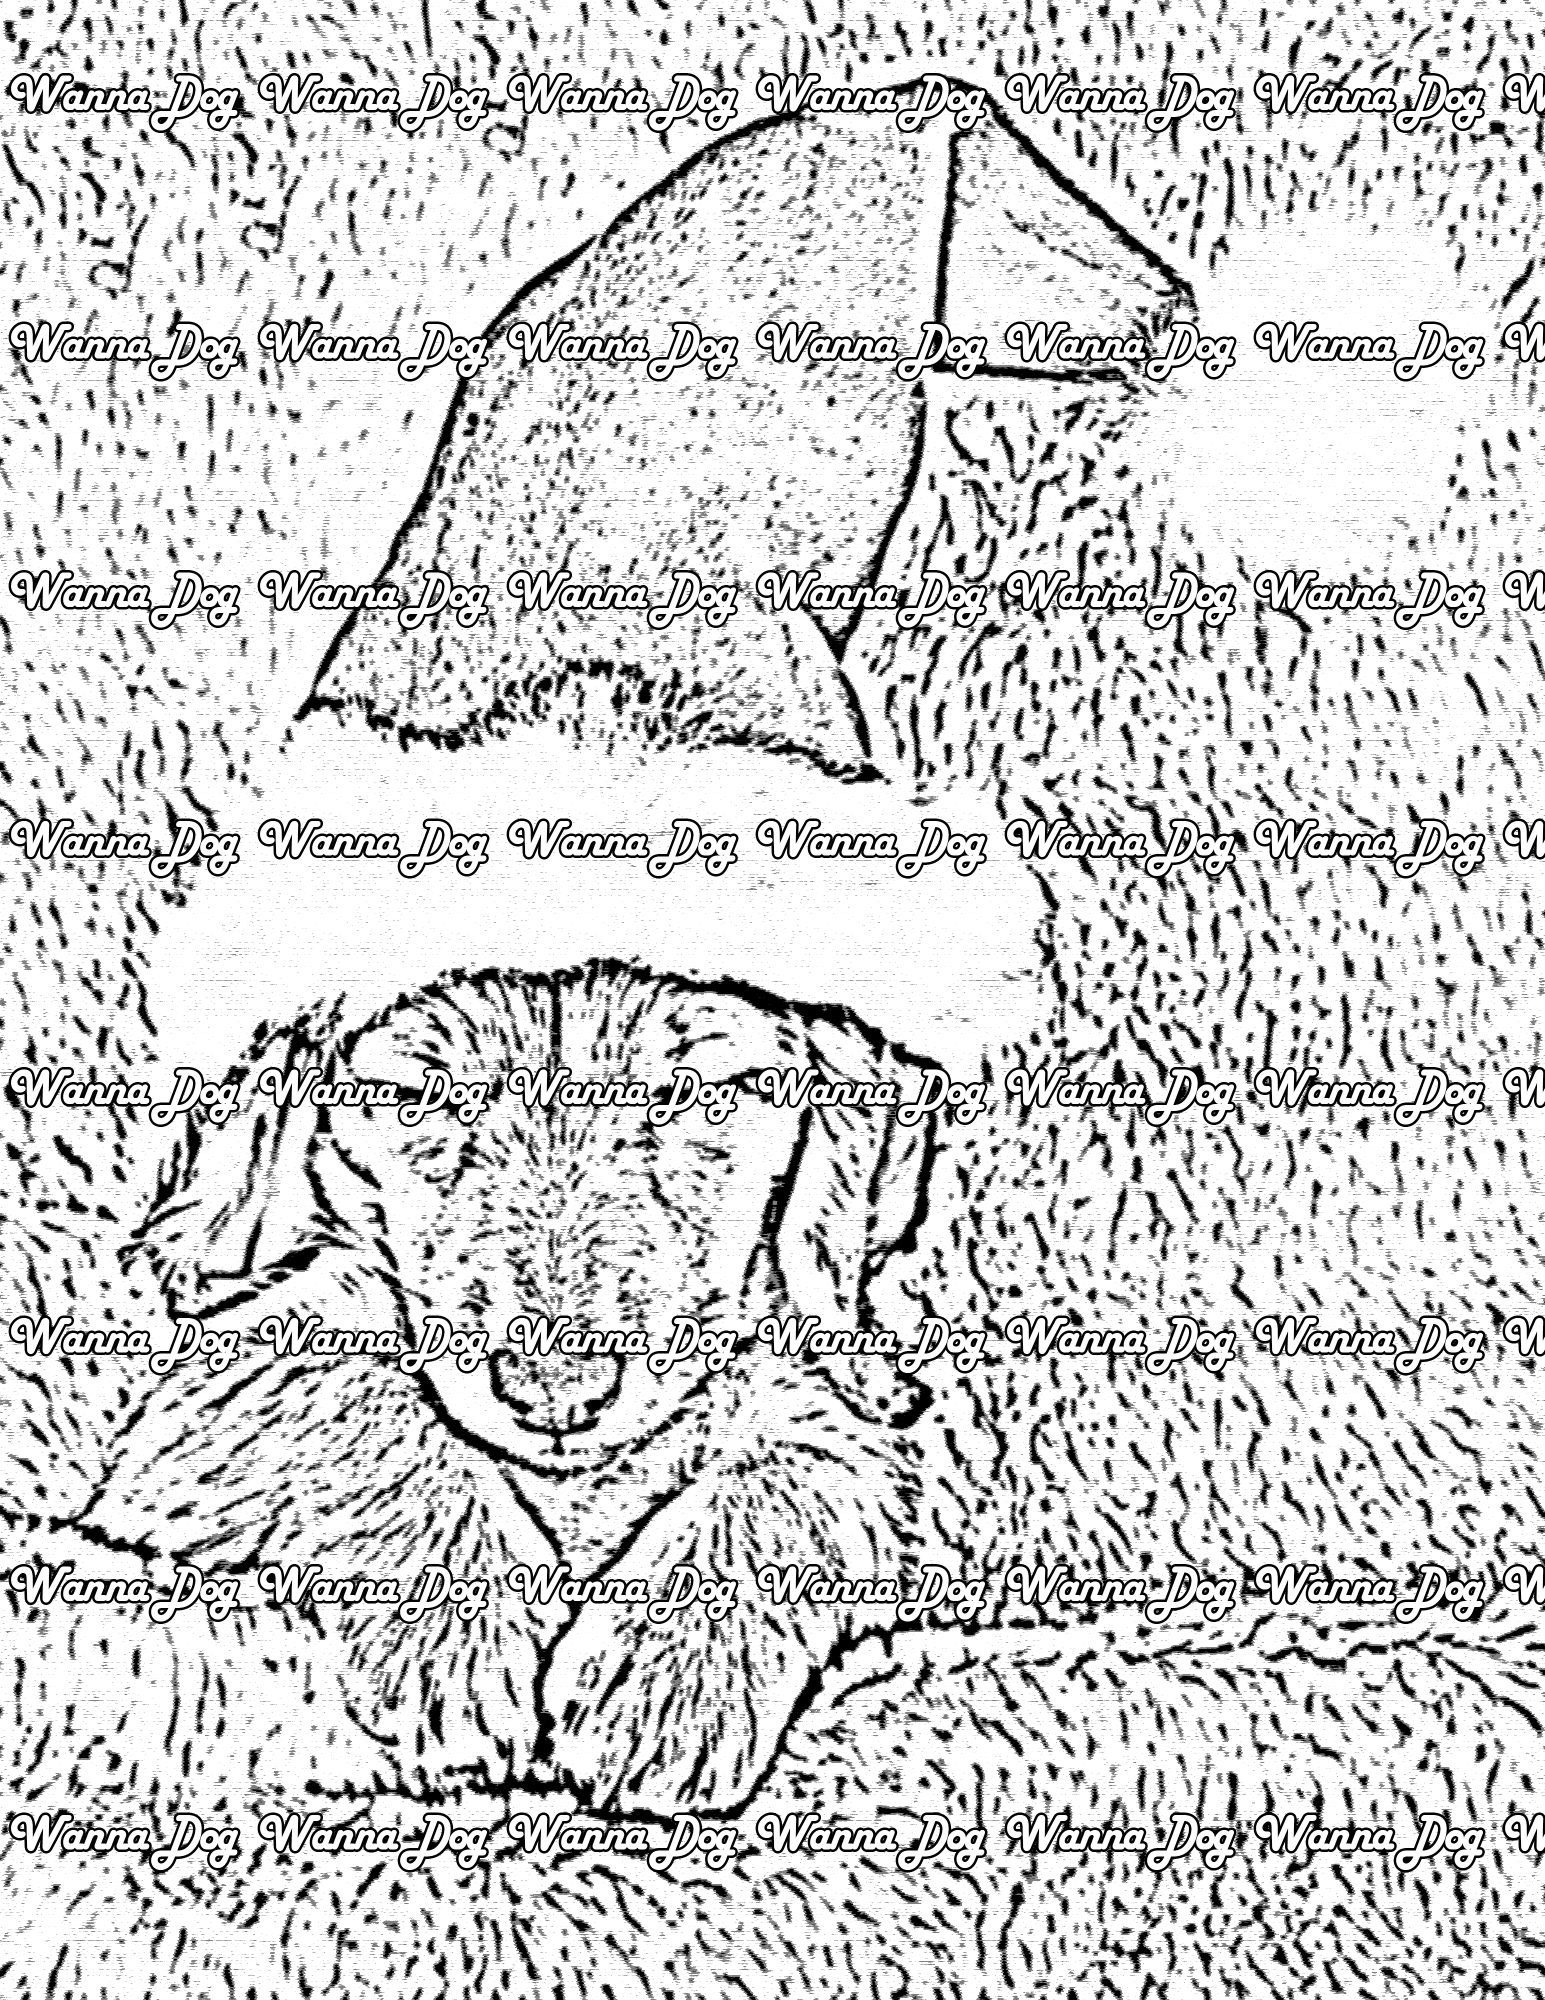 Dachshund Coloring Page of a Dachshund sleeping with a santa hat